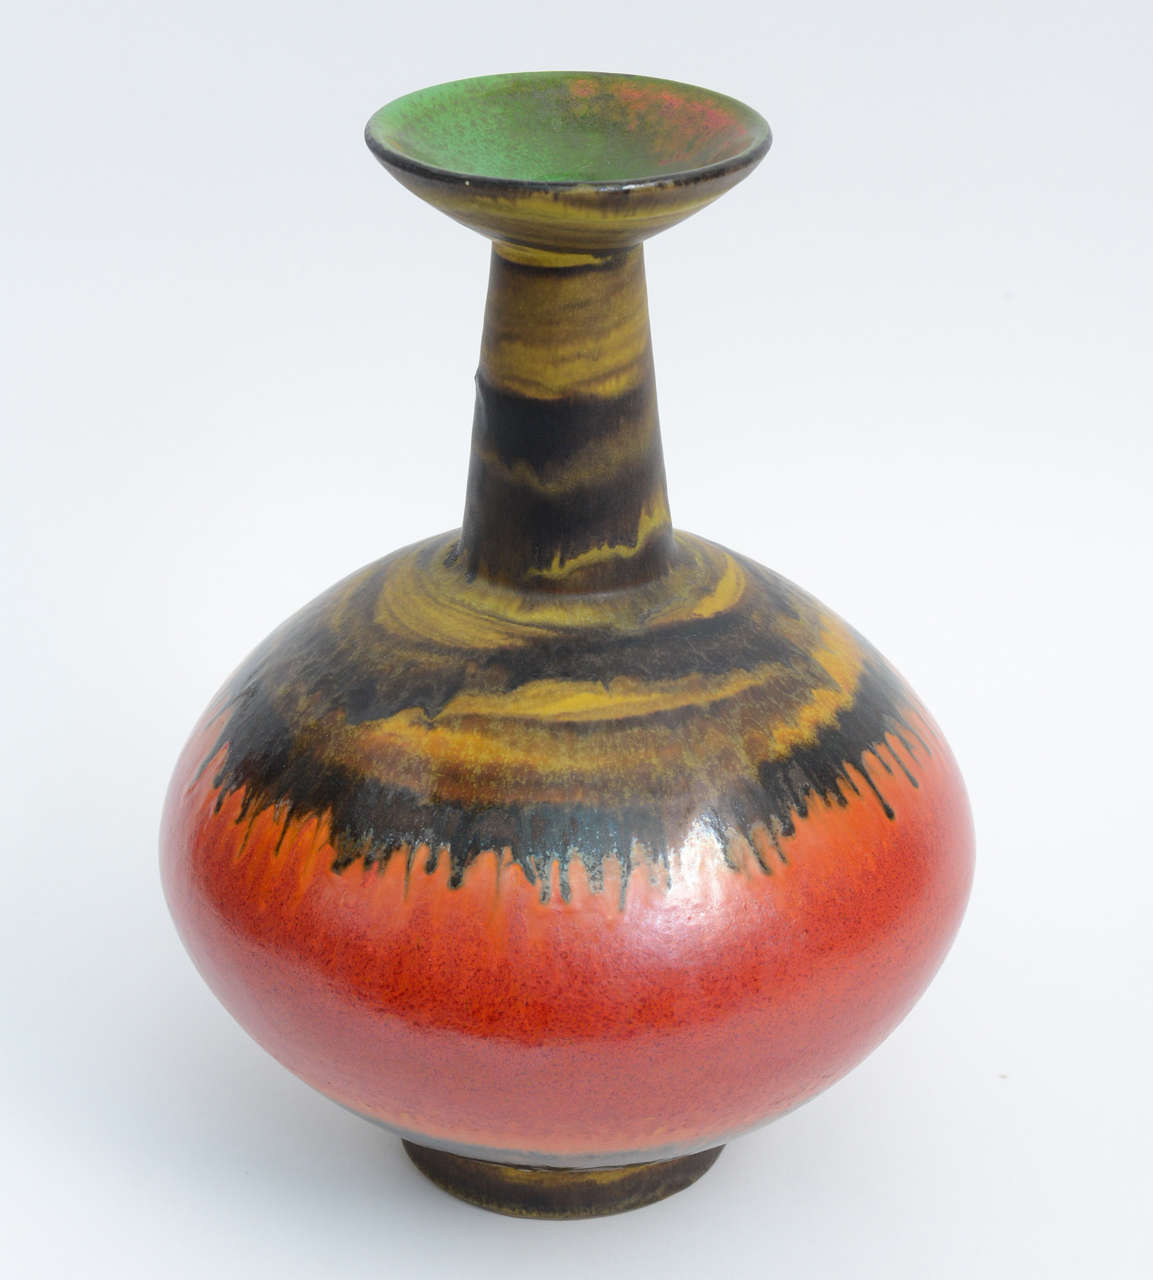 This unique Italian modernist pottery by by Alvino Bagni for Raymor, showcases the best of the techniques. Beautiful hues of orange, yellow and dripping black with a hint of green complement one another perfectly. Base of the vase is hand-signed